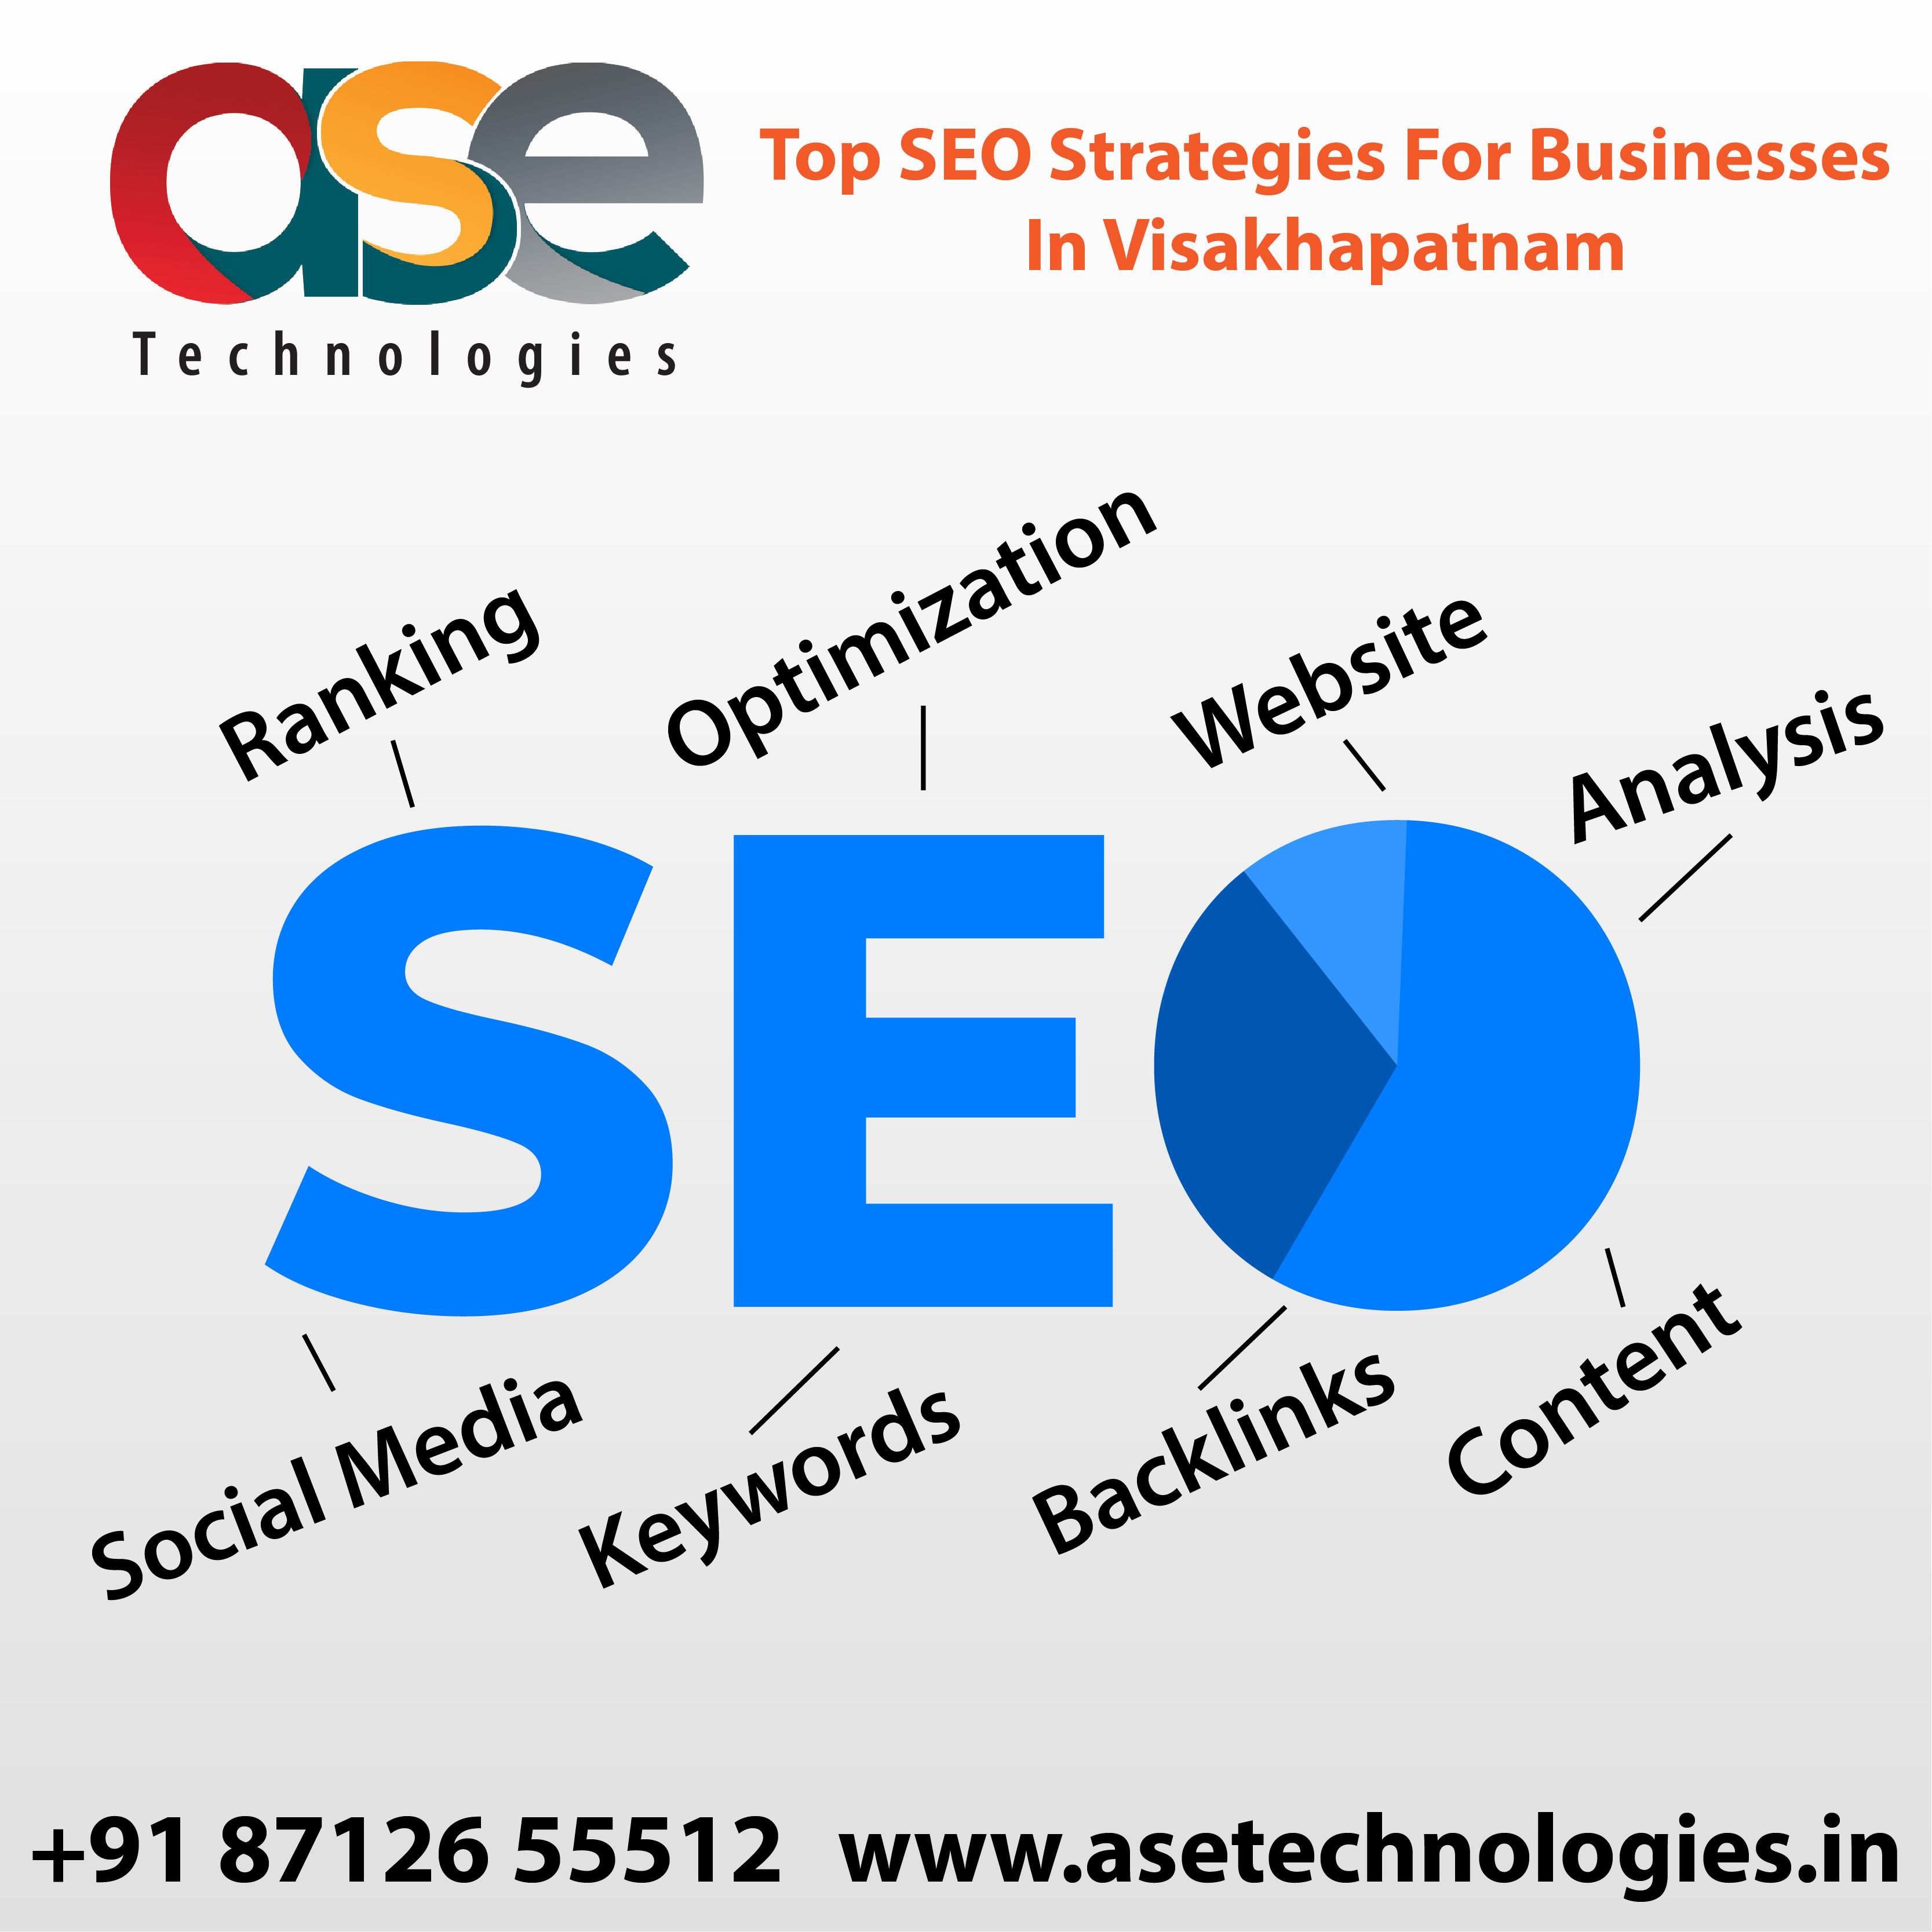 Top SEO Strategies for Businesses in Vizag